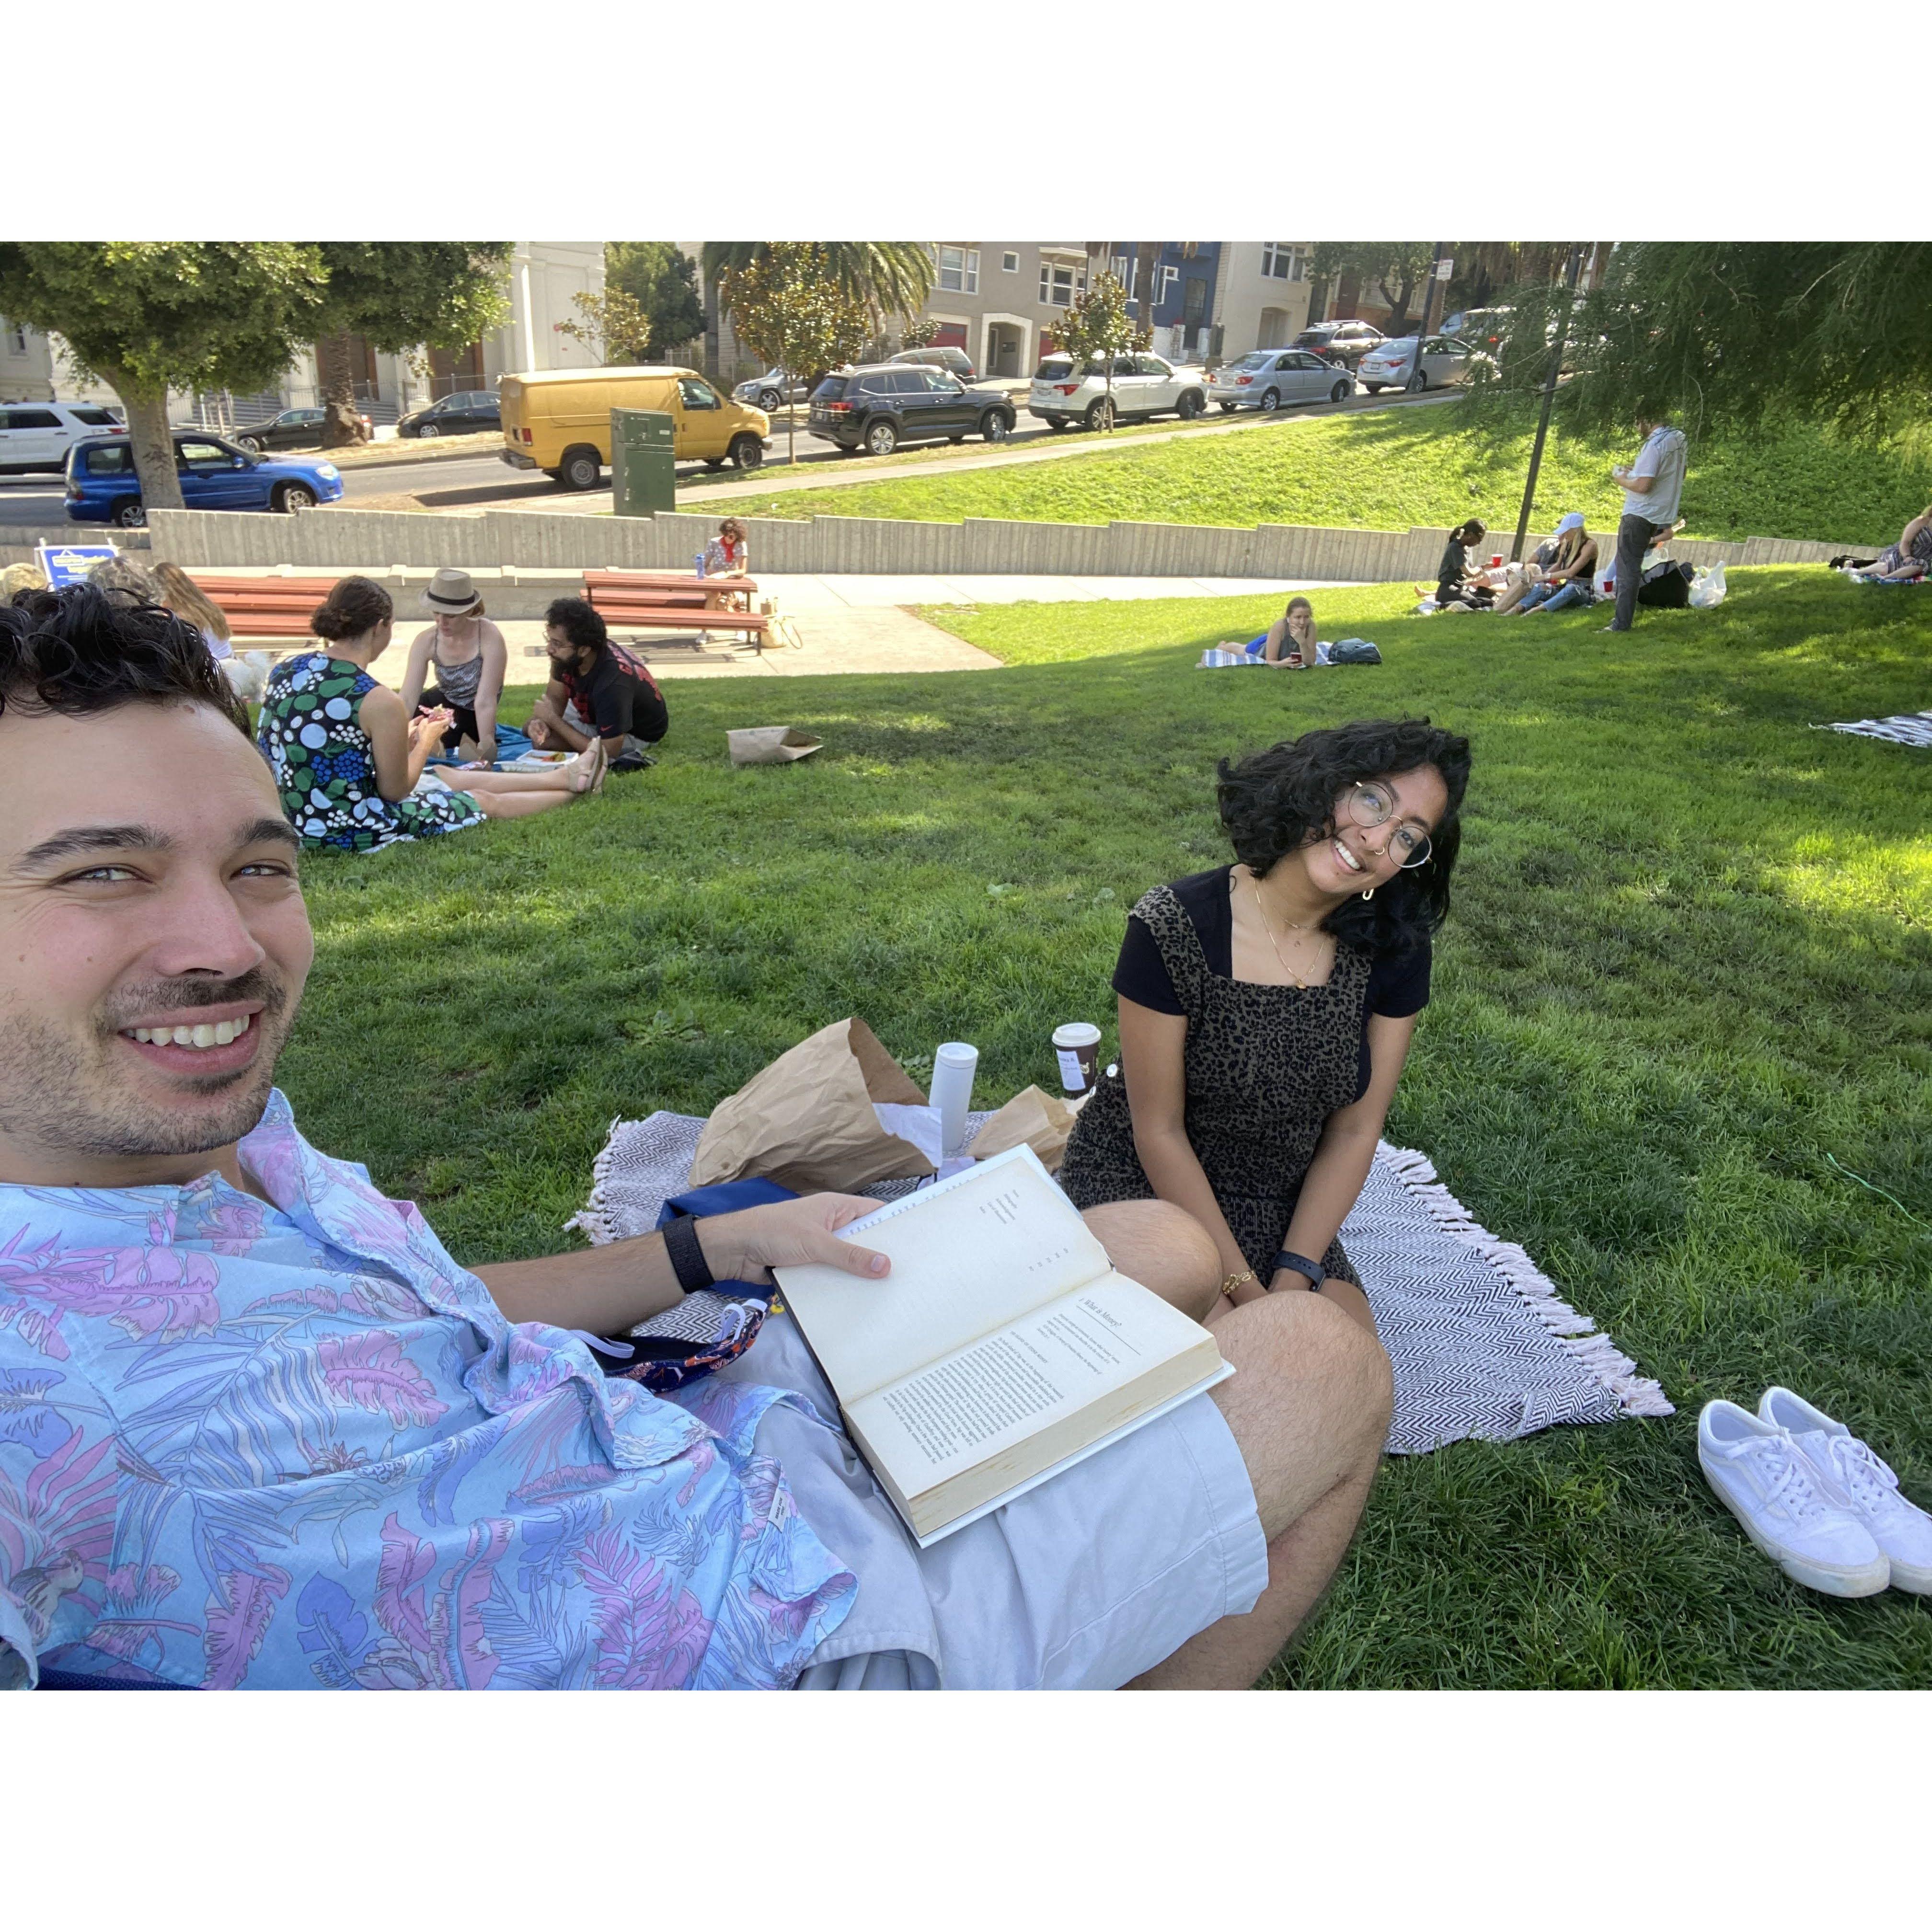 Our first book together was Recursion by Blake Crouch in 2020 and ever since, we've loved reading the same books together! This one was a reading date at Dolores Park in SF.